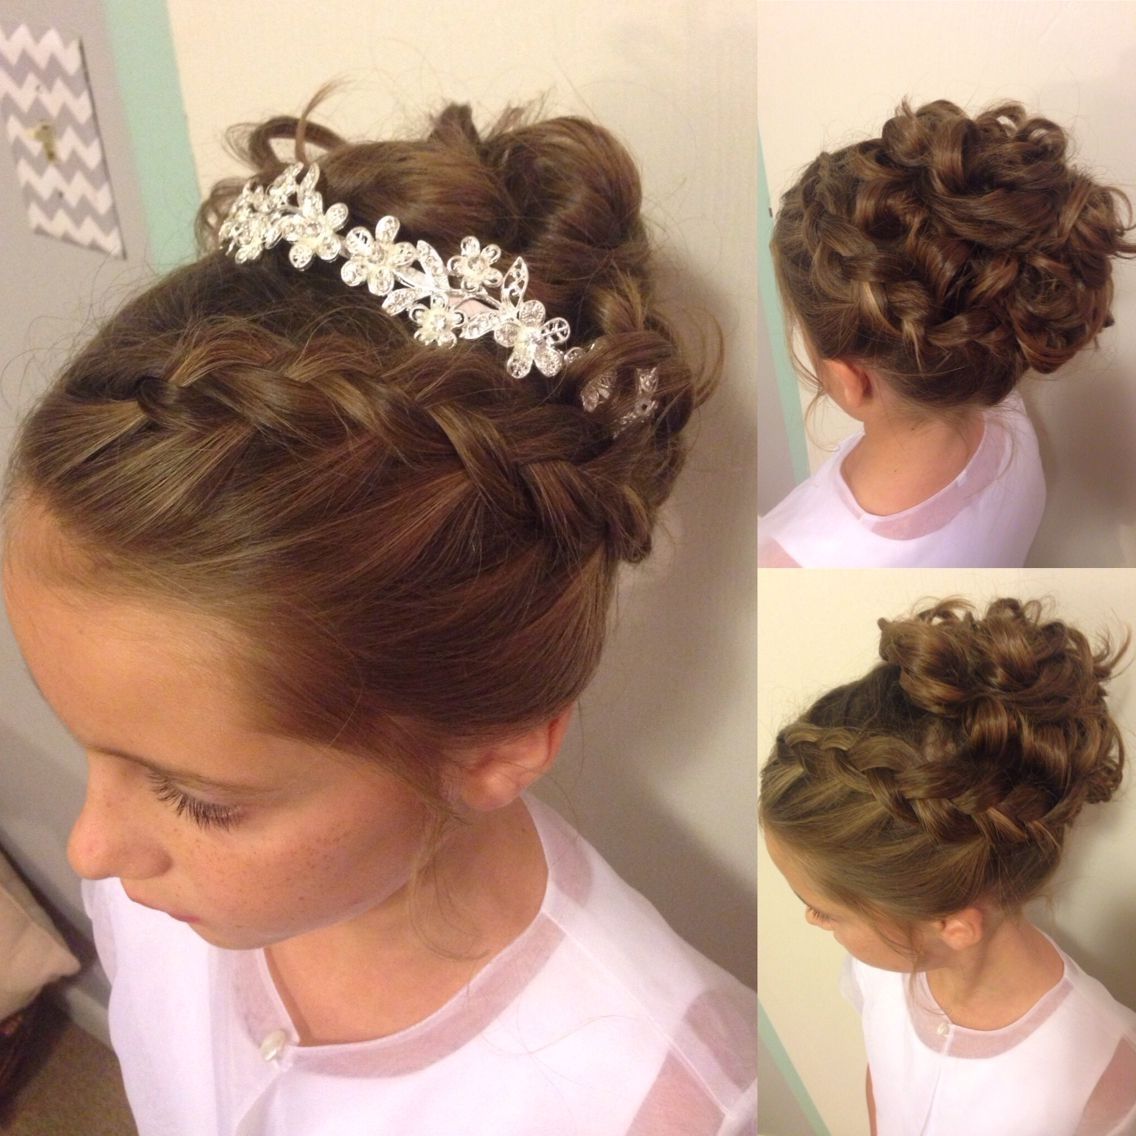 Pinmary Rose On My Work | Pinterest | Updo, Weddings And Girls Intended For Little Girl Updo Hairstyles (View 1 of 15)